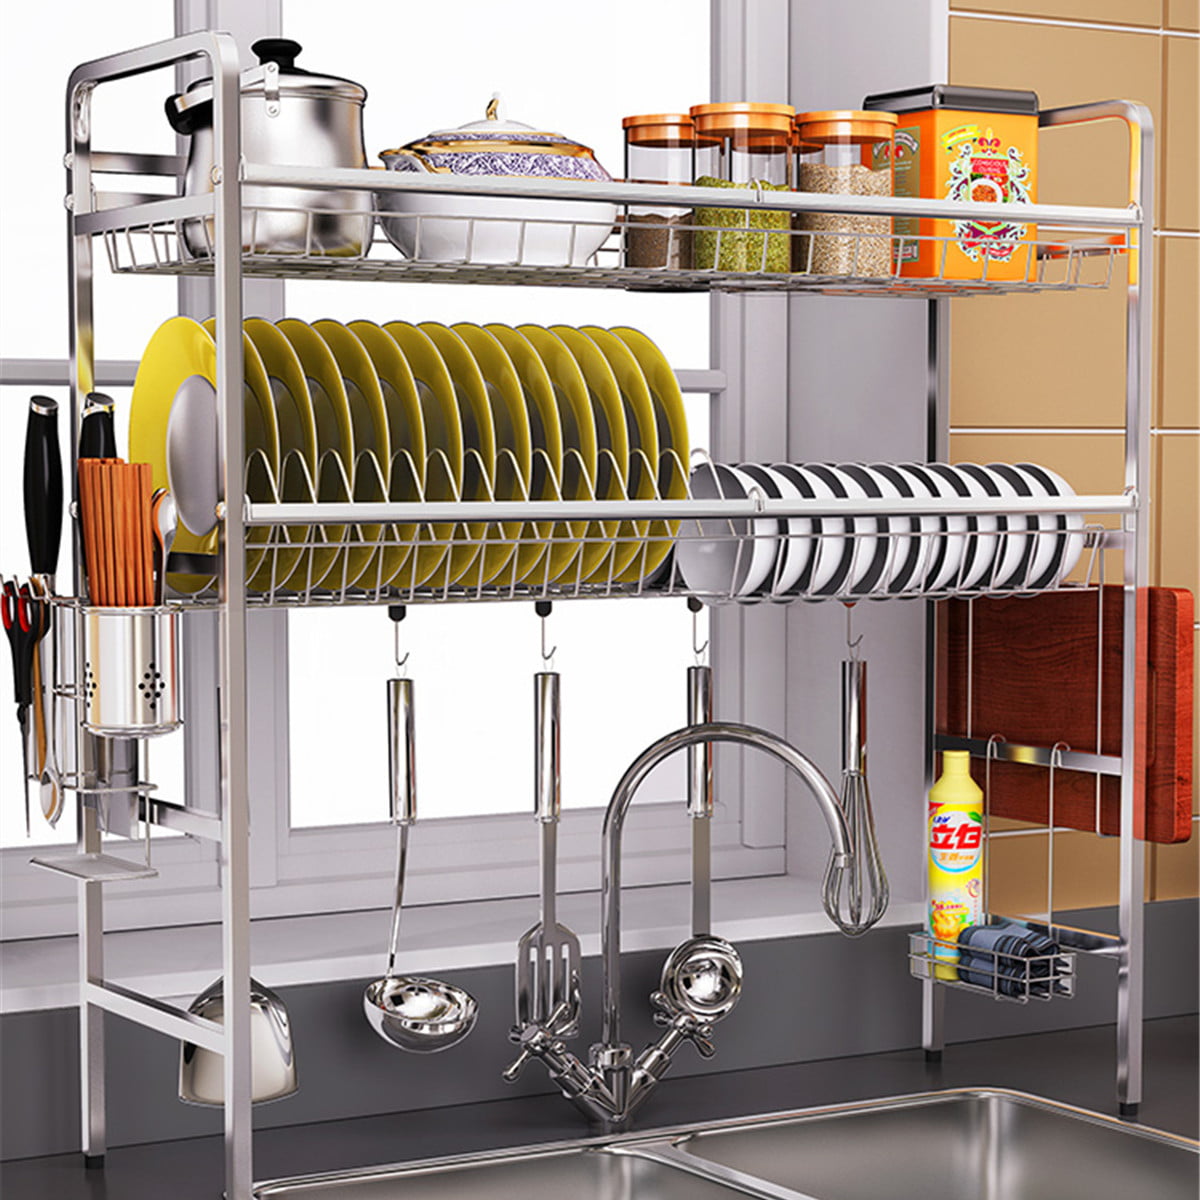 Stainless Steel Drying Rack Over Sink